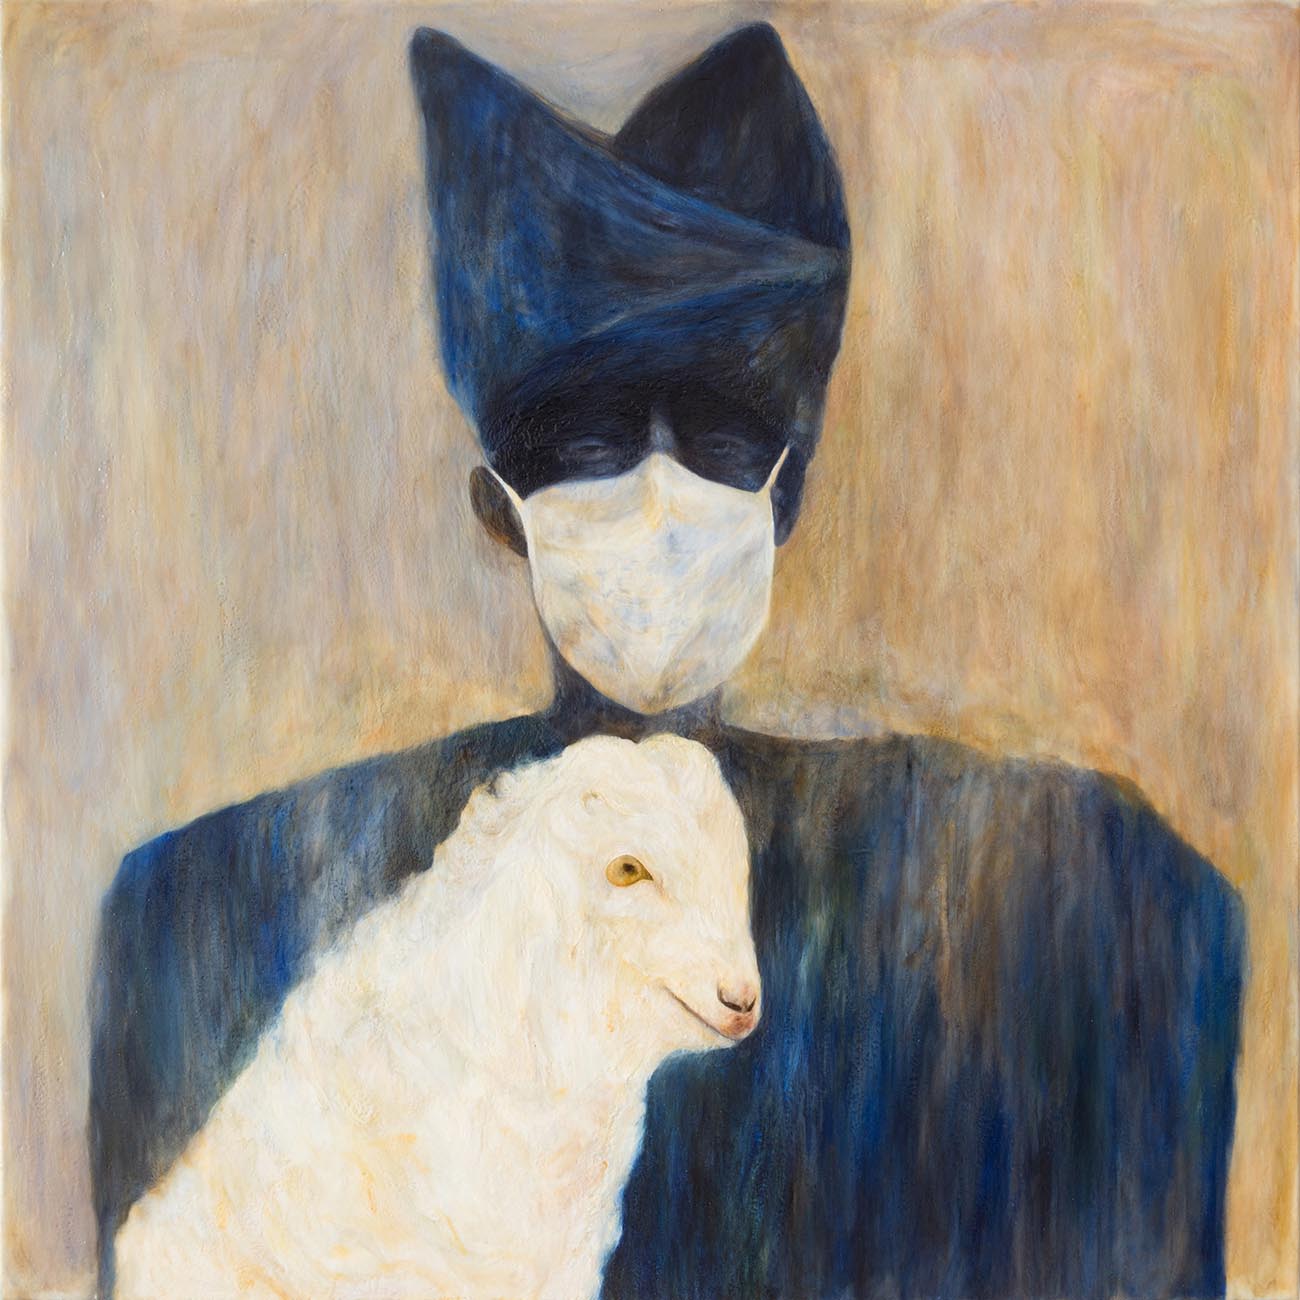 Woman with Goat and Surgical Mask, Original Portrait on Linen Queen Baeleit Art